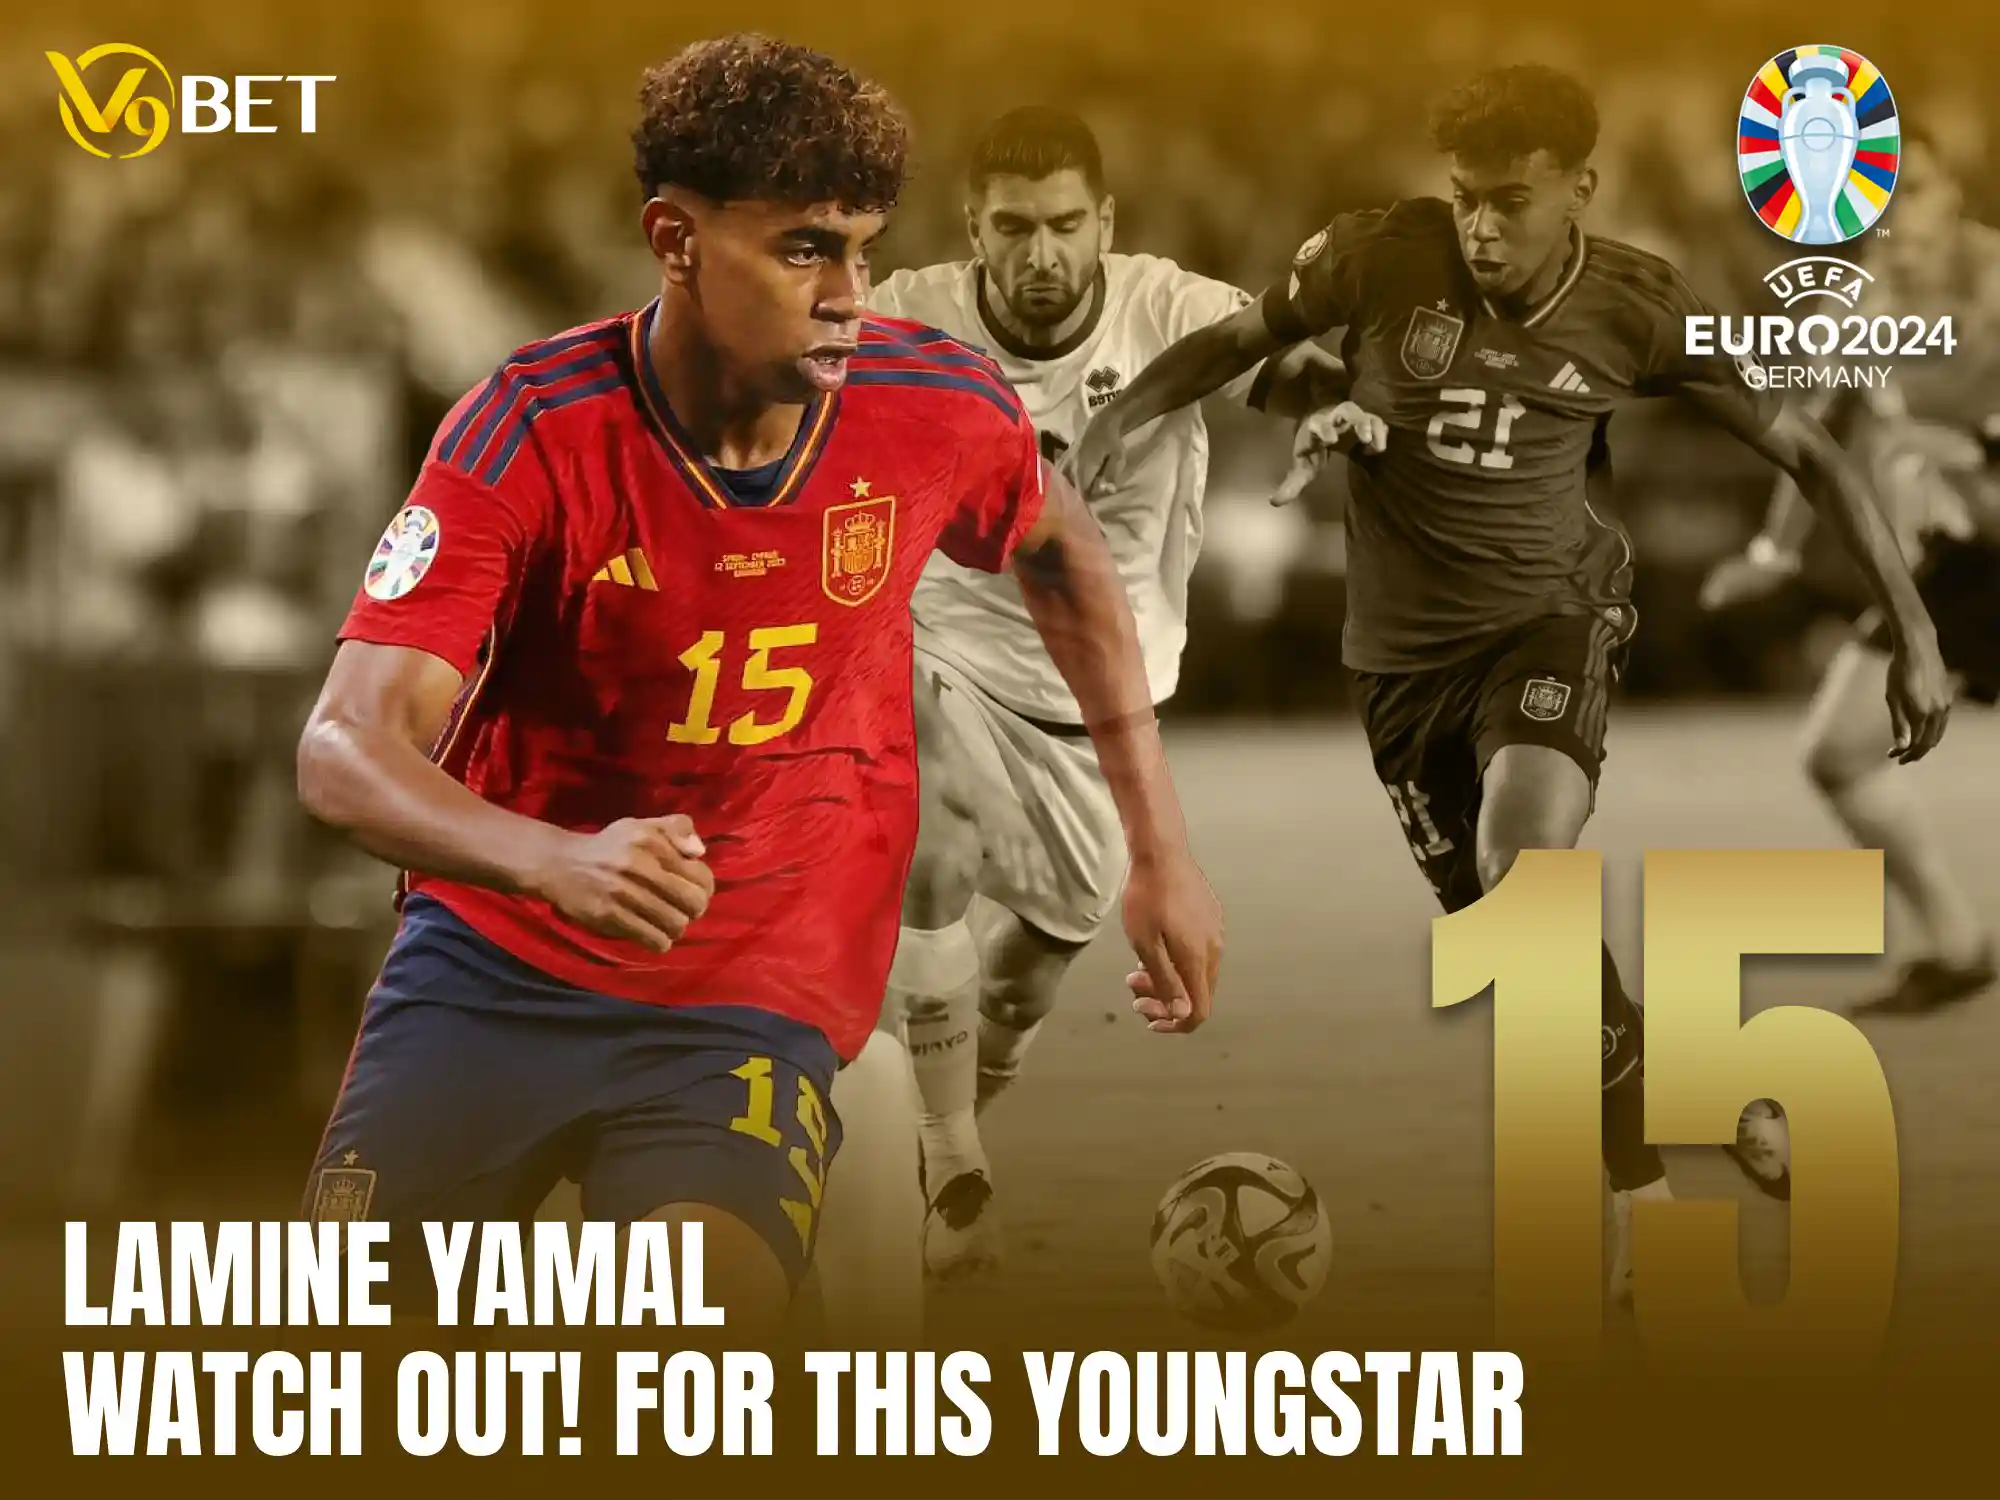 Lamine Yamal - Young soccer superstar with a bright future at EURO 2024